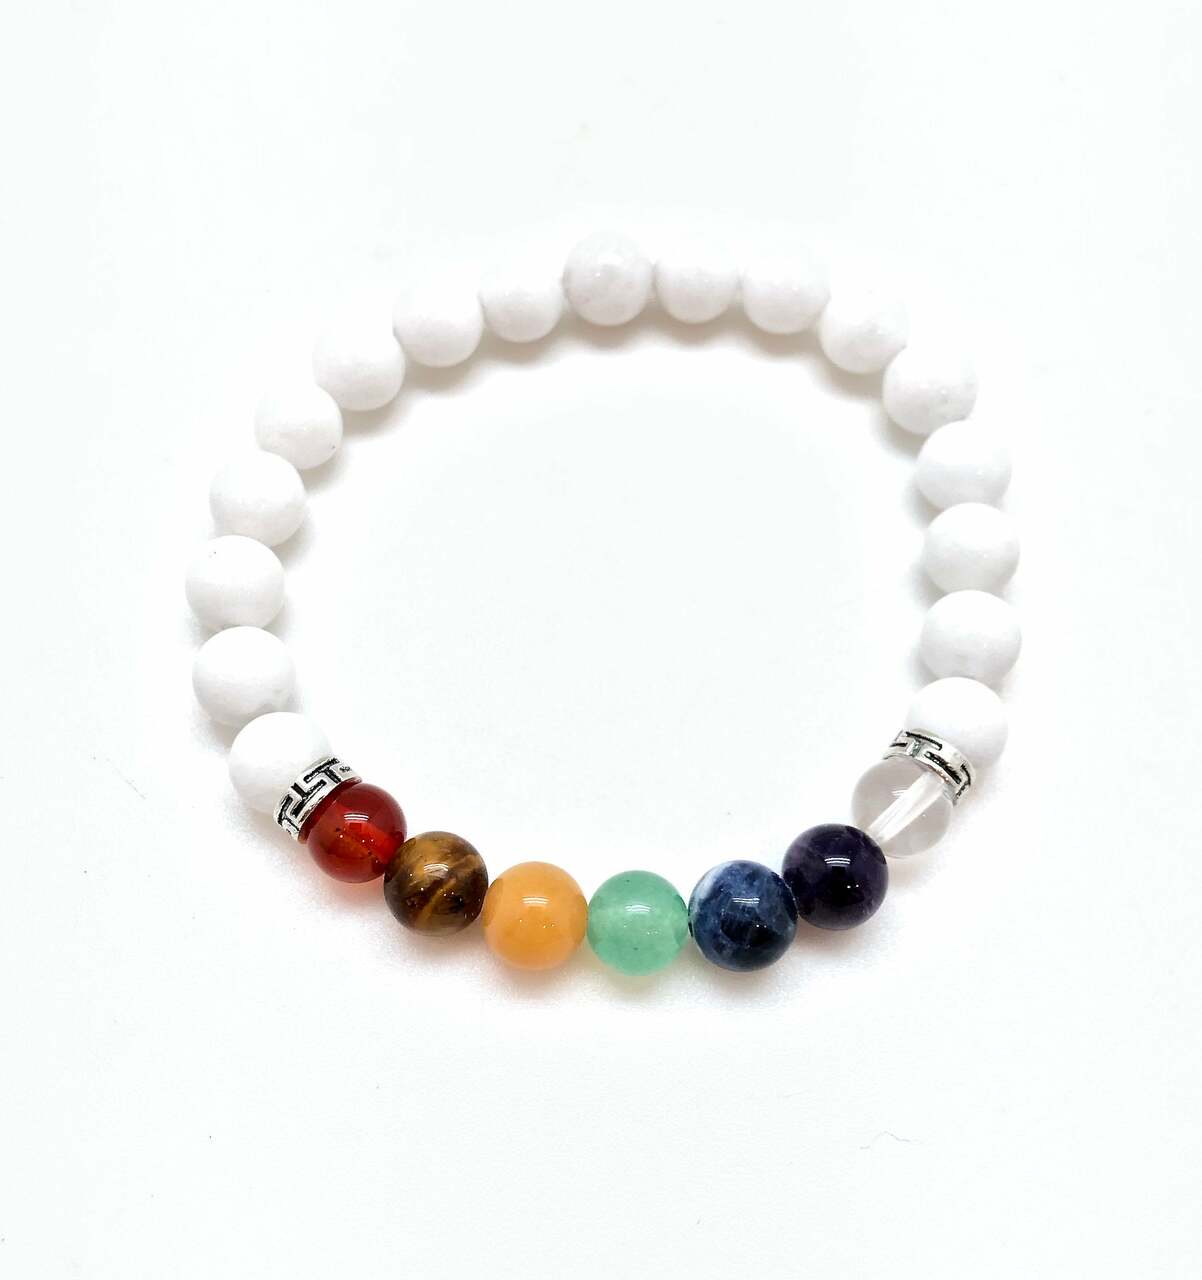 Seven Chakra Bracelet with White Agate Beads